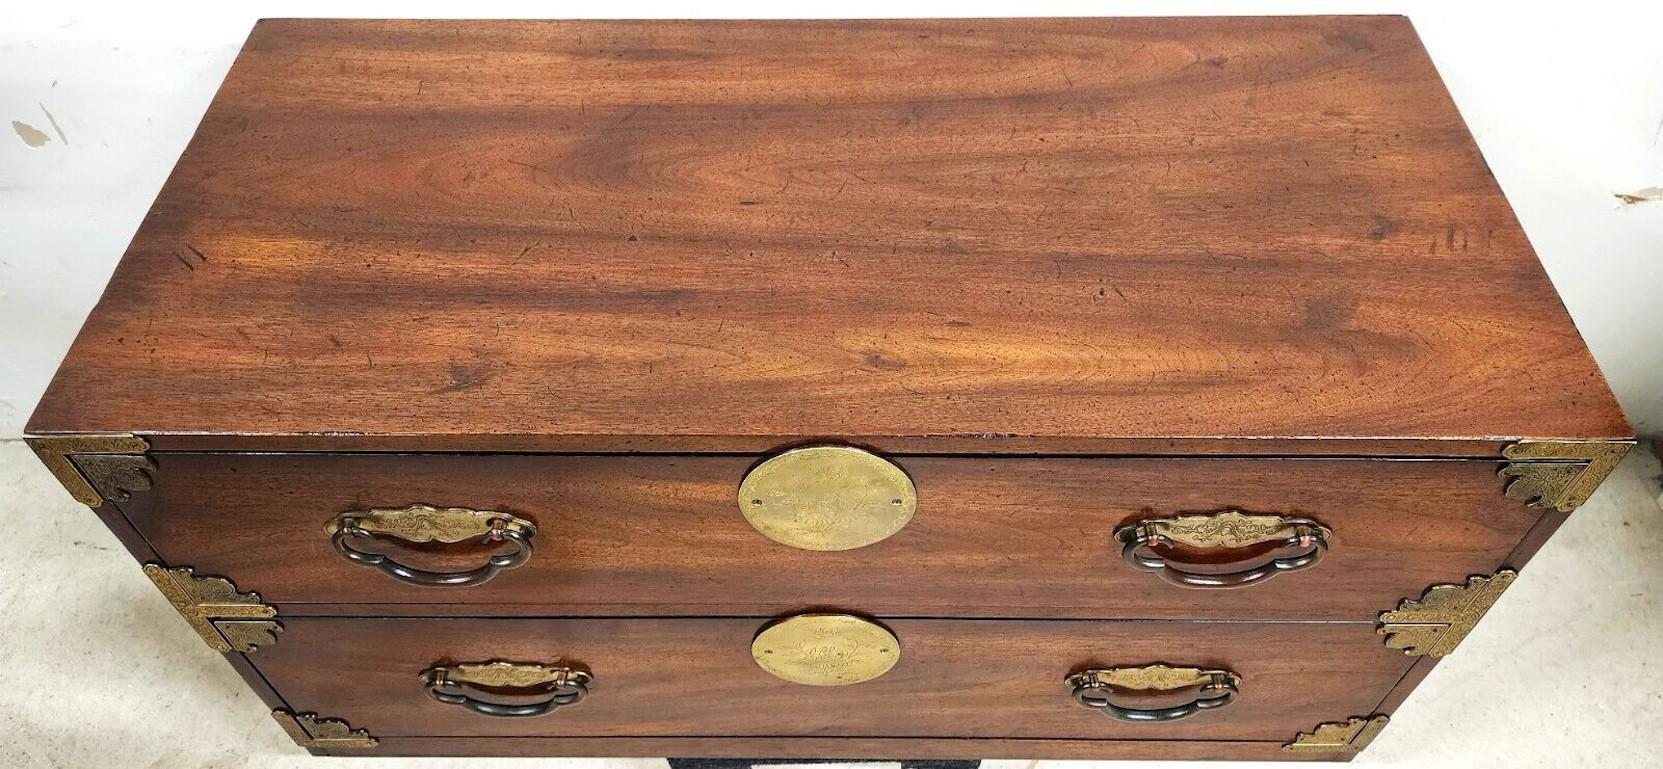 For FULL item description click on CONTINUE READING at the bottom of this page.
Offering One Of Our Recent Palm Beach Estate Fine Furniture Acquisitions Of A
HENREDON Campaign Chest Asian Japanese Tansu End of Bed TV Table Bench

Approximate